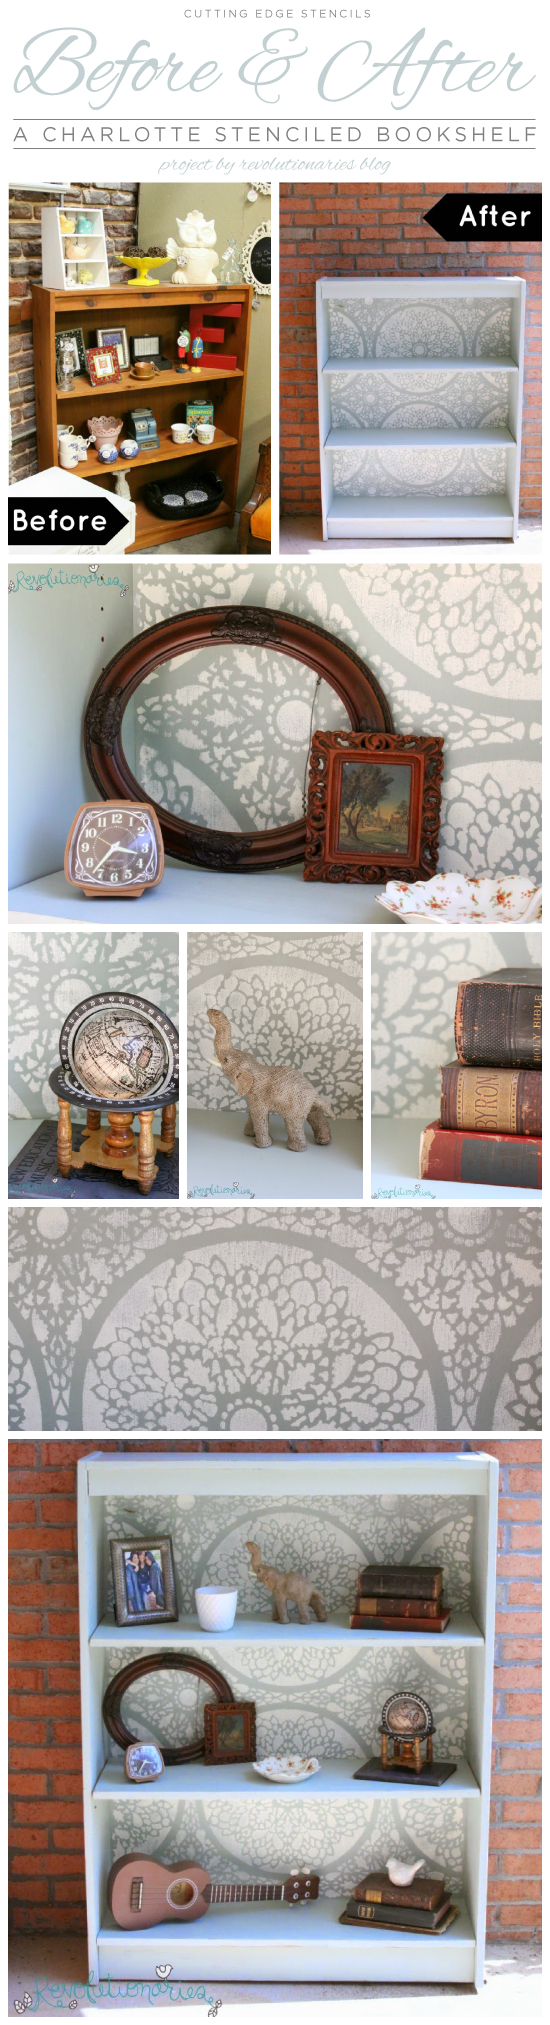 Cutting Edge Stencils shares a DIY stenciled bookshelf using the Charlotte Allover lace like stencil. http://www.cuttingedgestencils.com/charlotte-allover-stencil-pattern.html